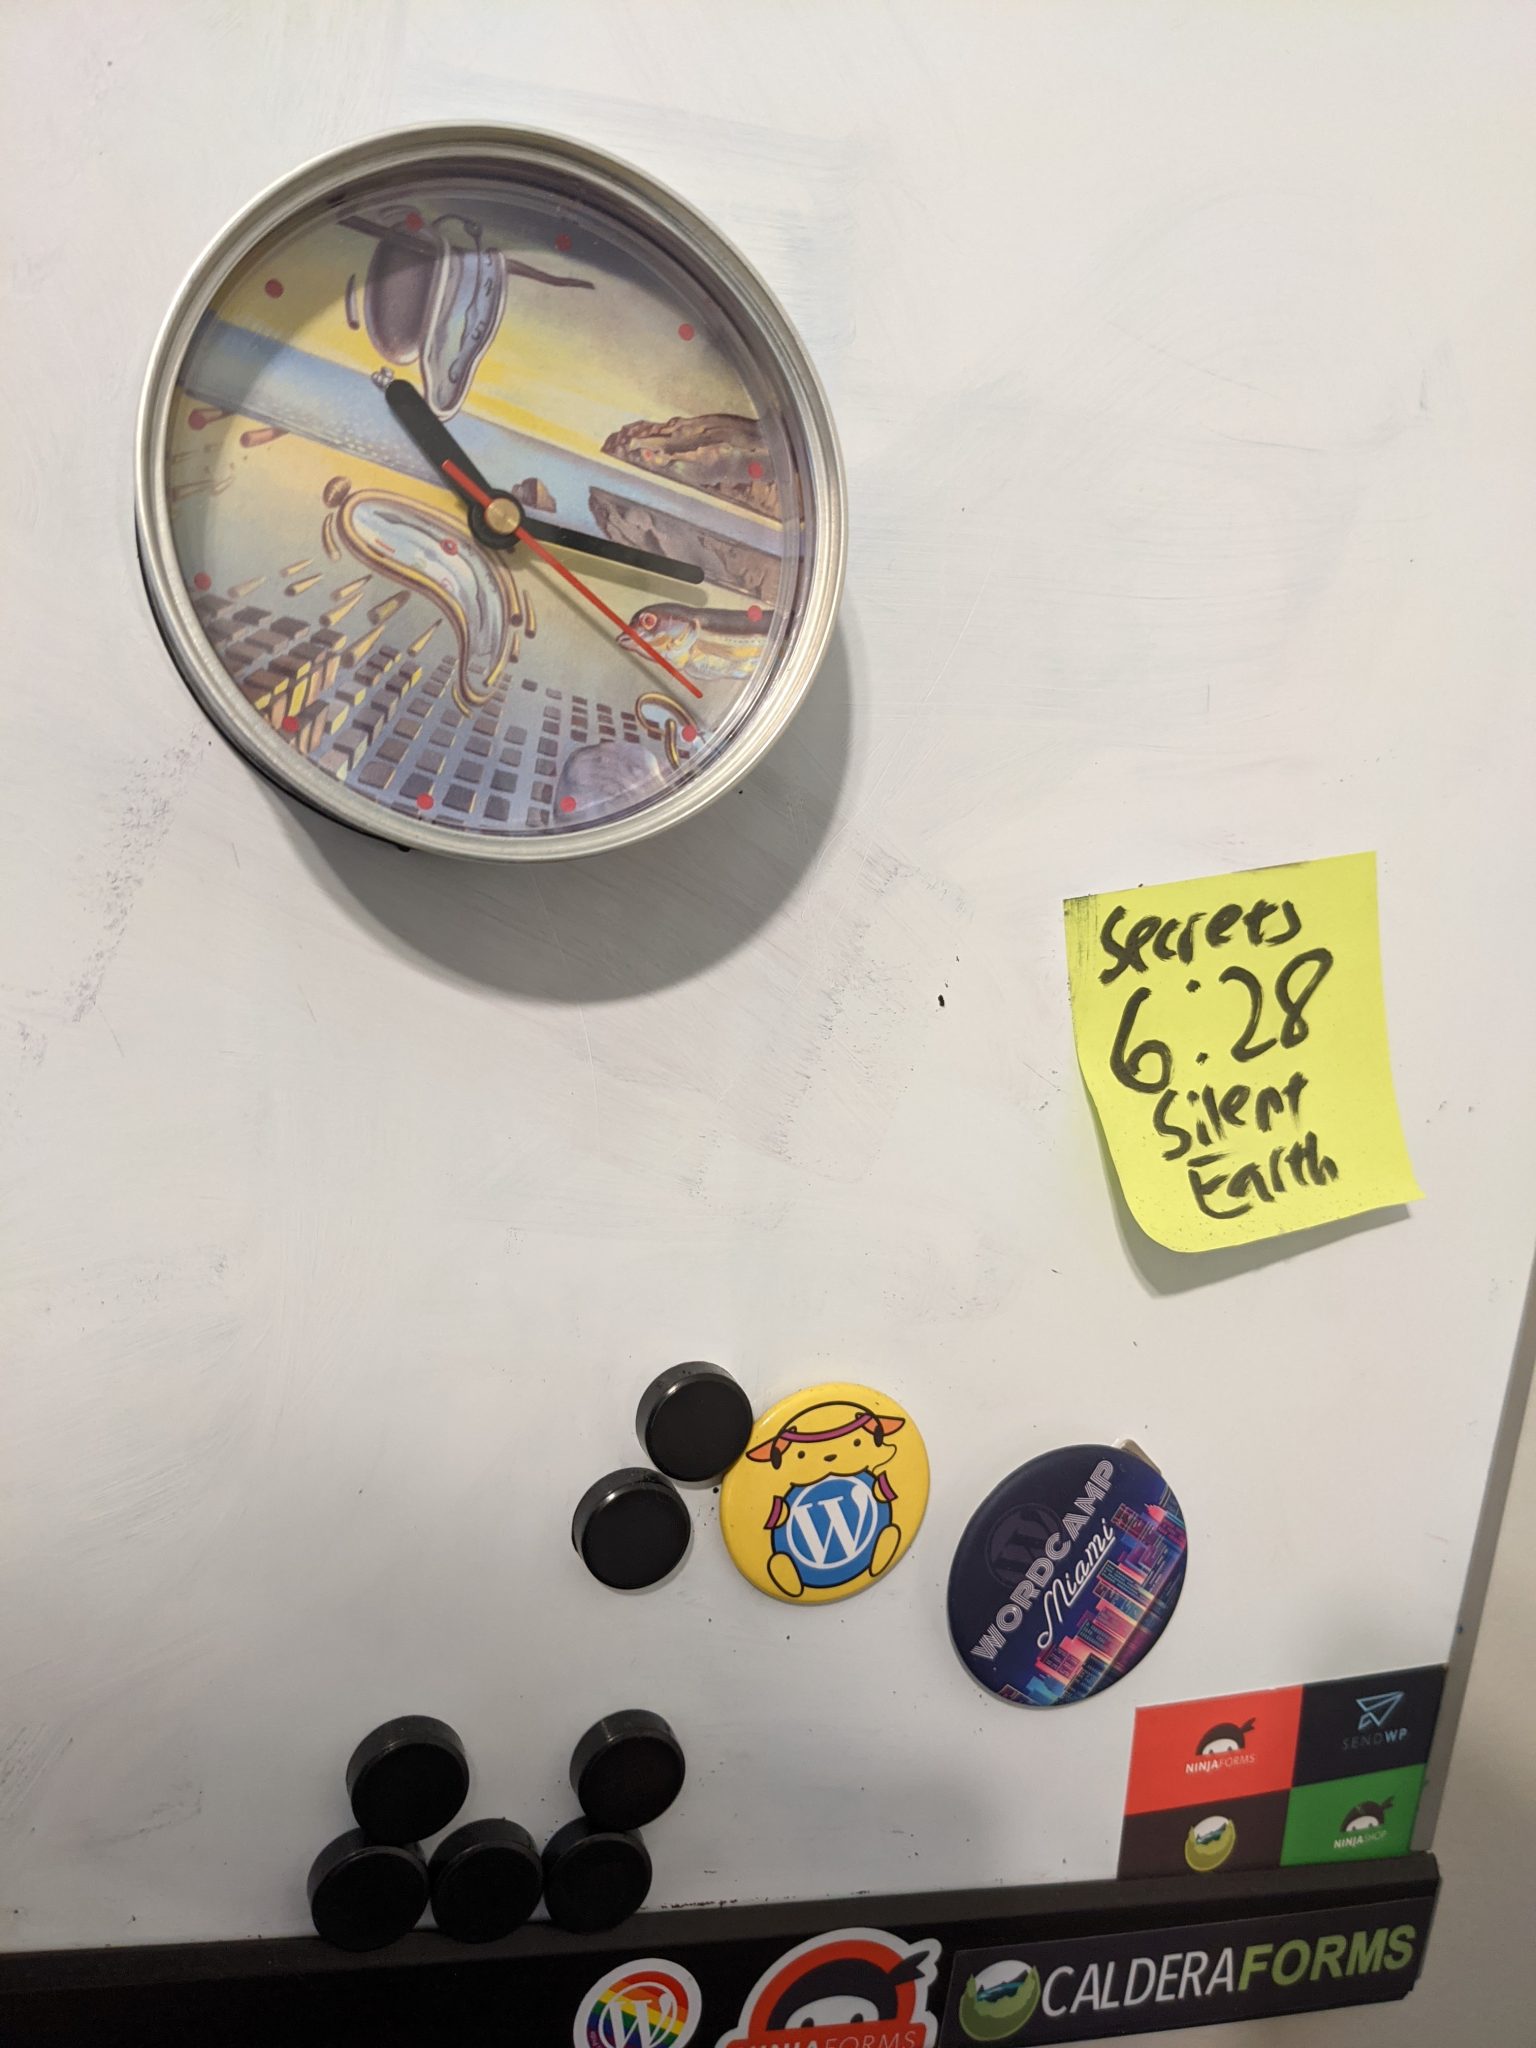 A white board, with several WordPress magnets and a yellow post it note that says "Secret Silent Earth 6:28"